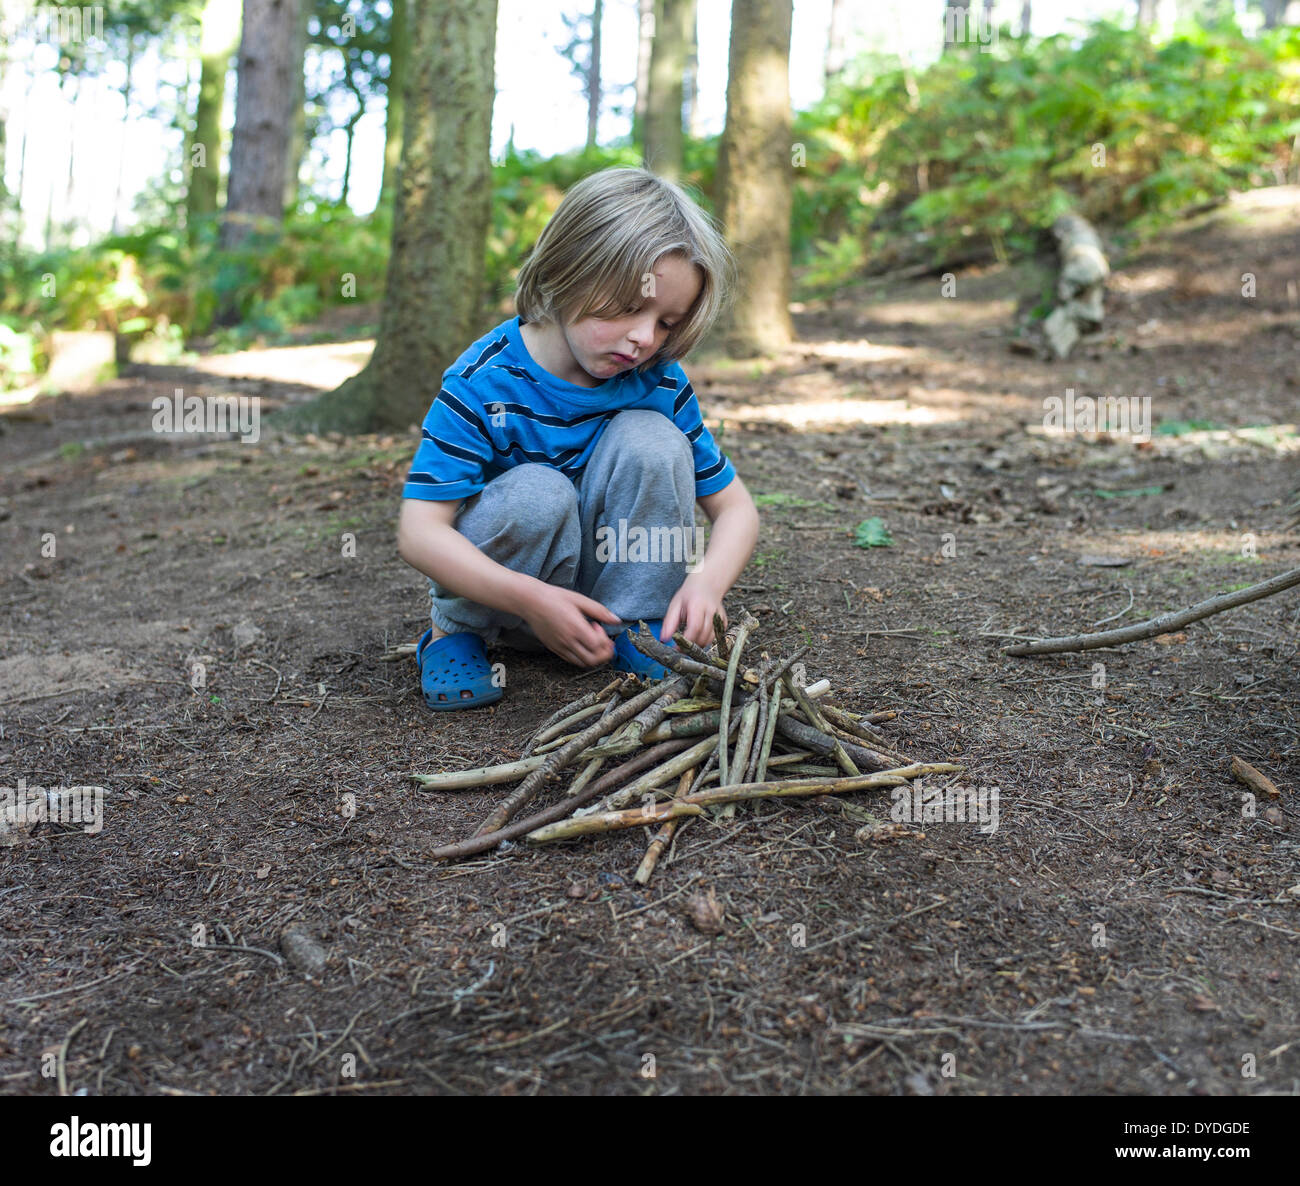 A young boy building a fire in the woods. Stock Photo